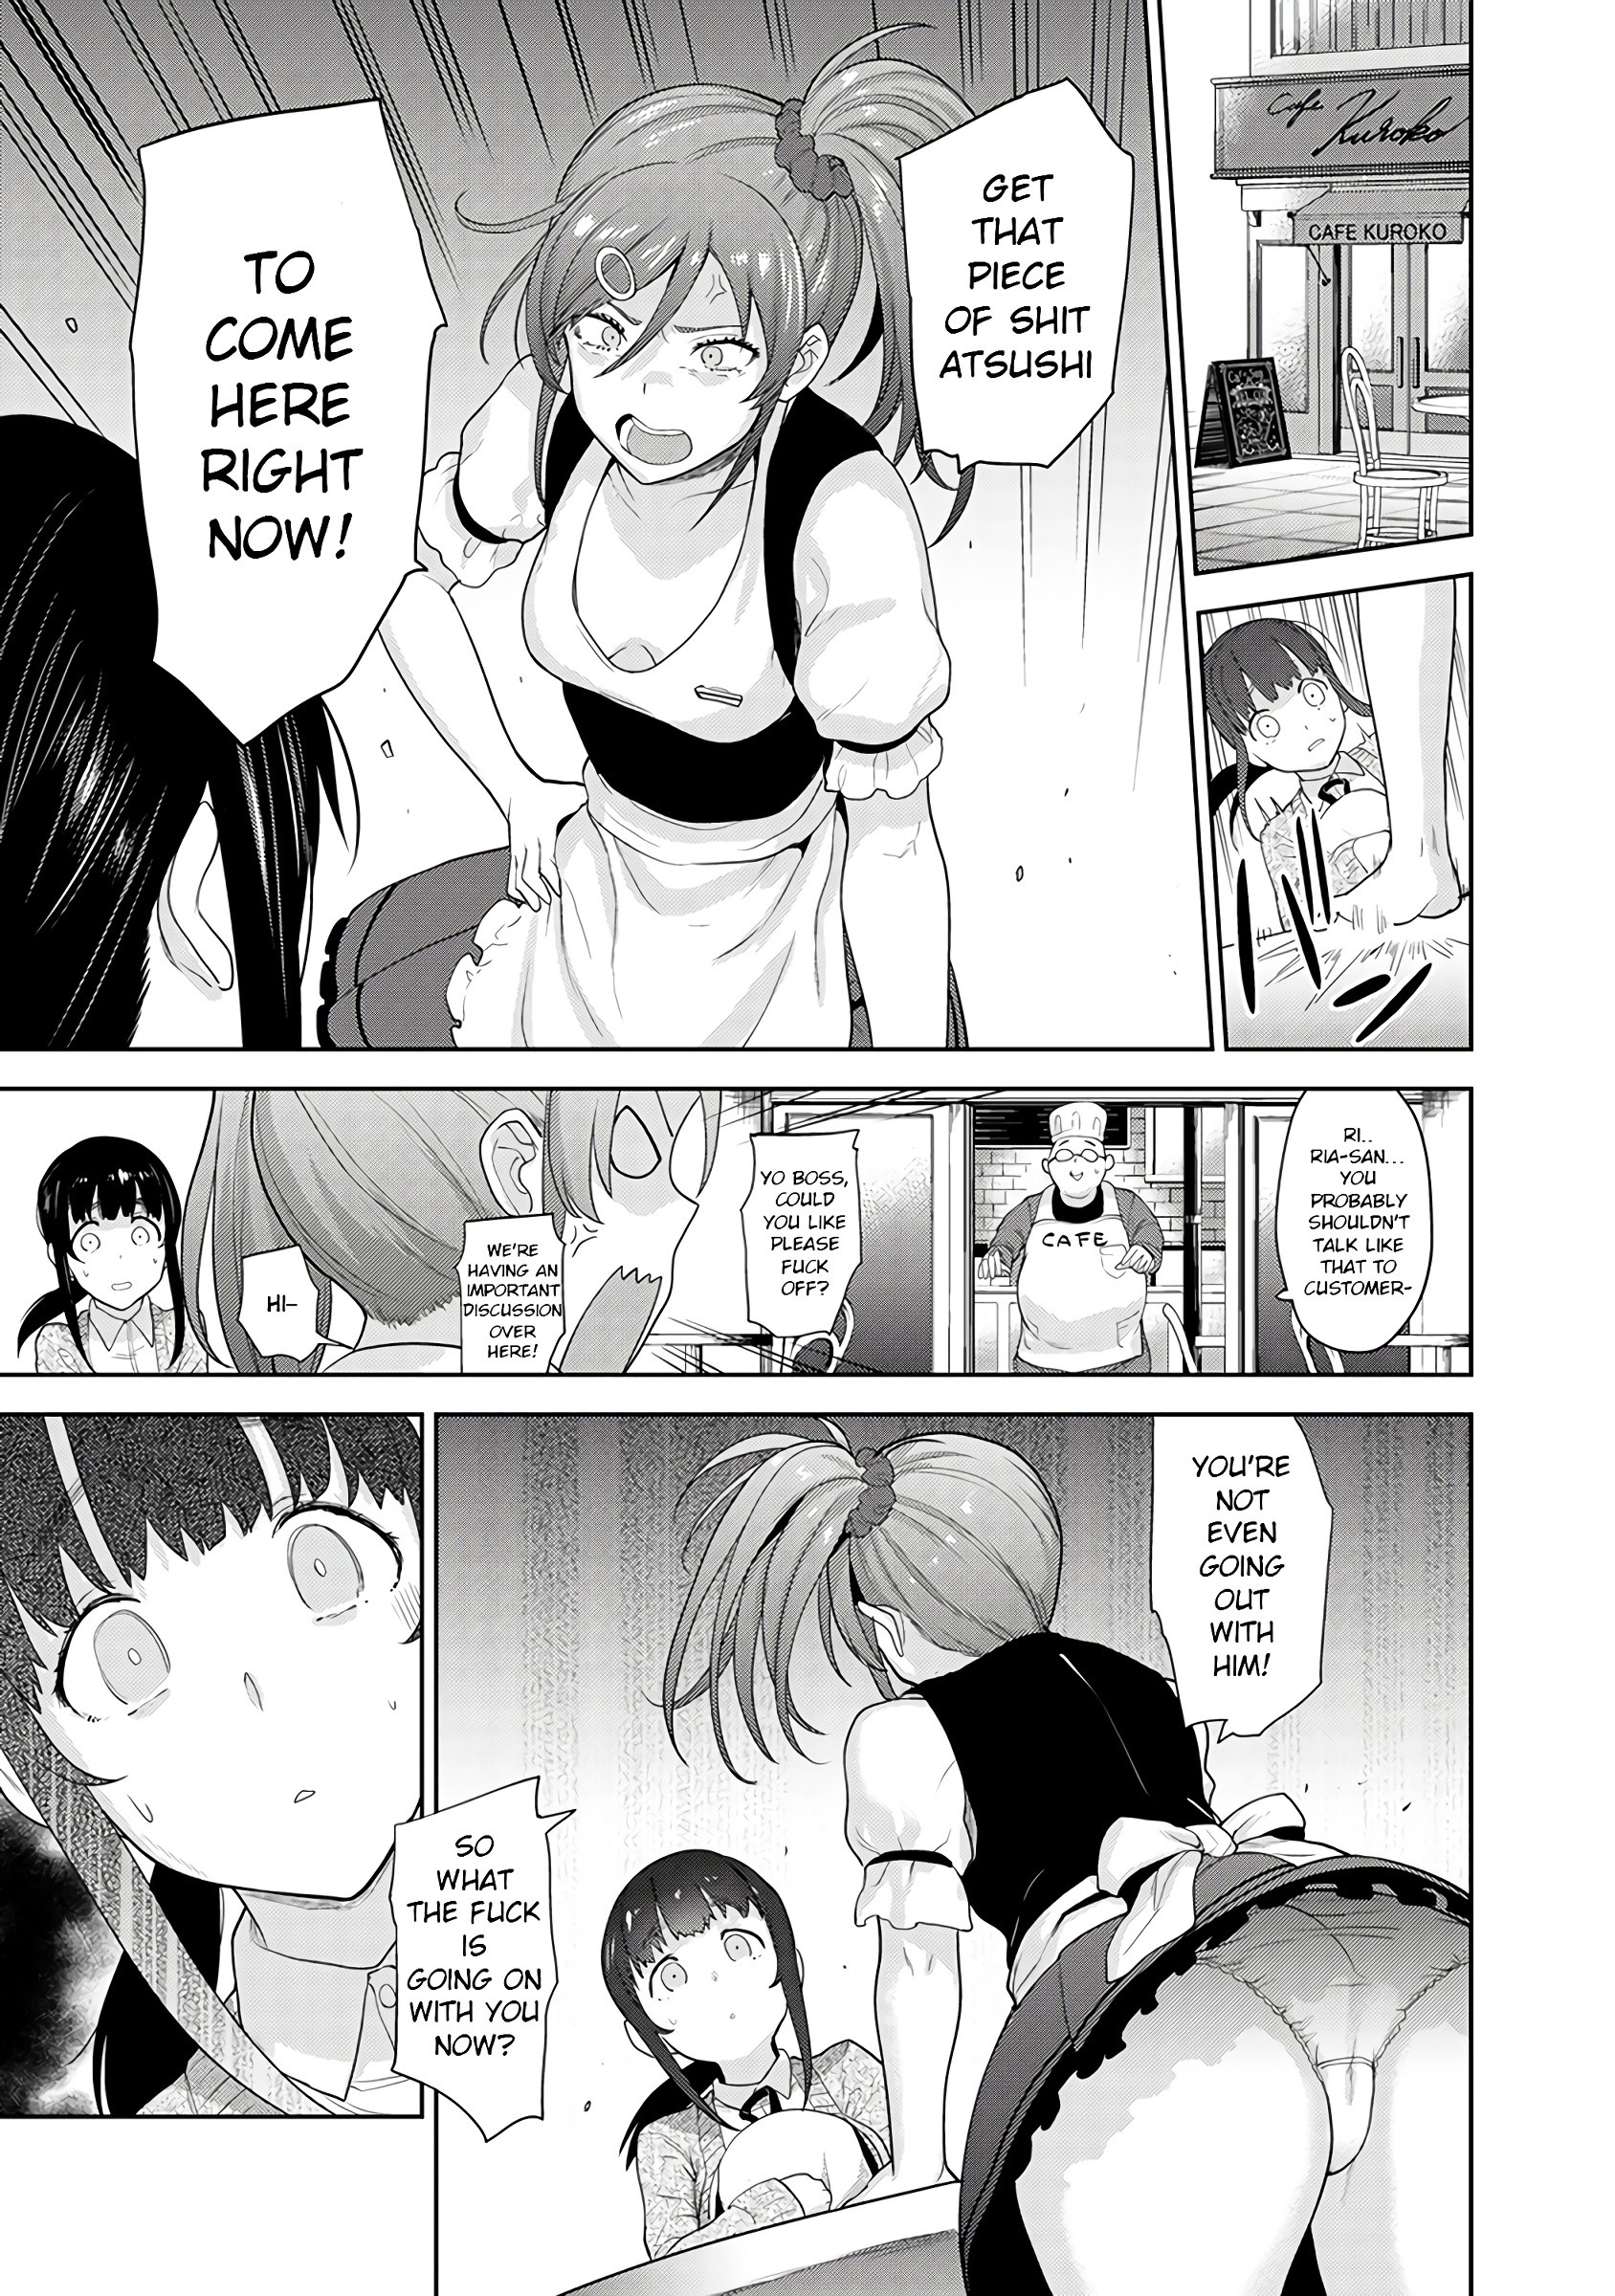 Method to Catch a Pretty Girl 9 hentai manga picture 13